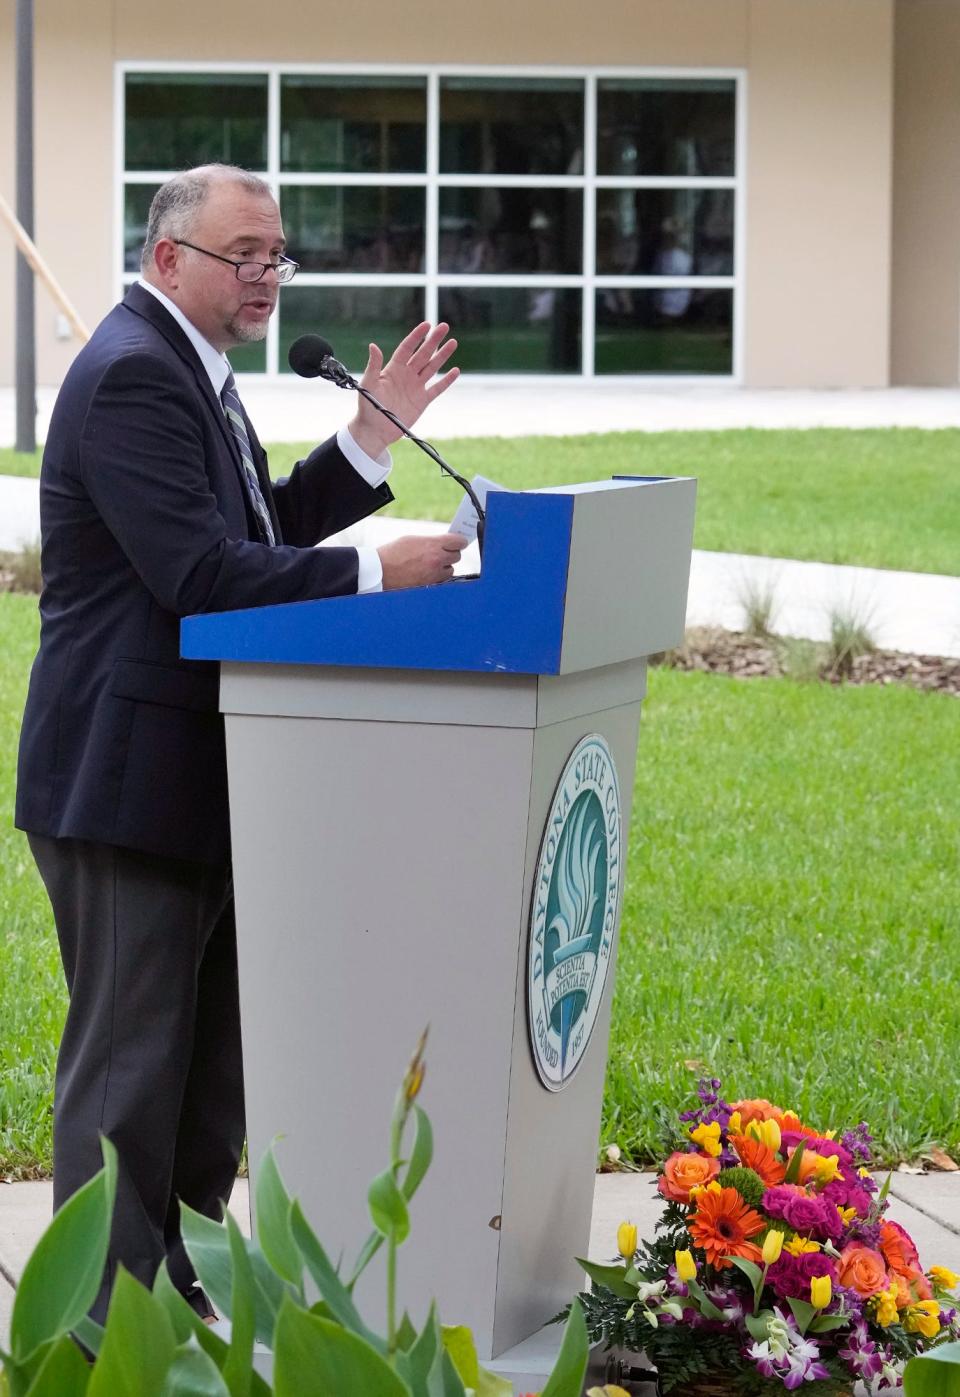 Daytona State College President Thomas LoBasso speaks during ribbon-cutting and dedication of the new student residence hall at Daytona State College, Thursday, May 5, 2022.